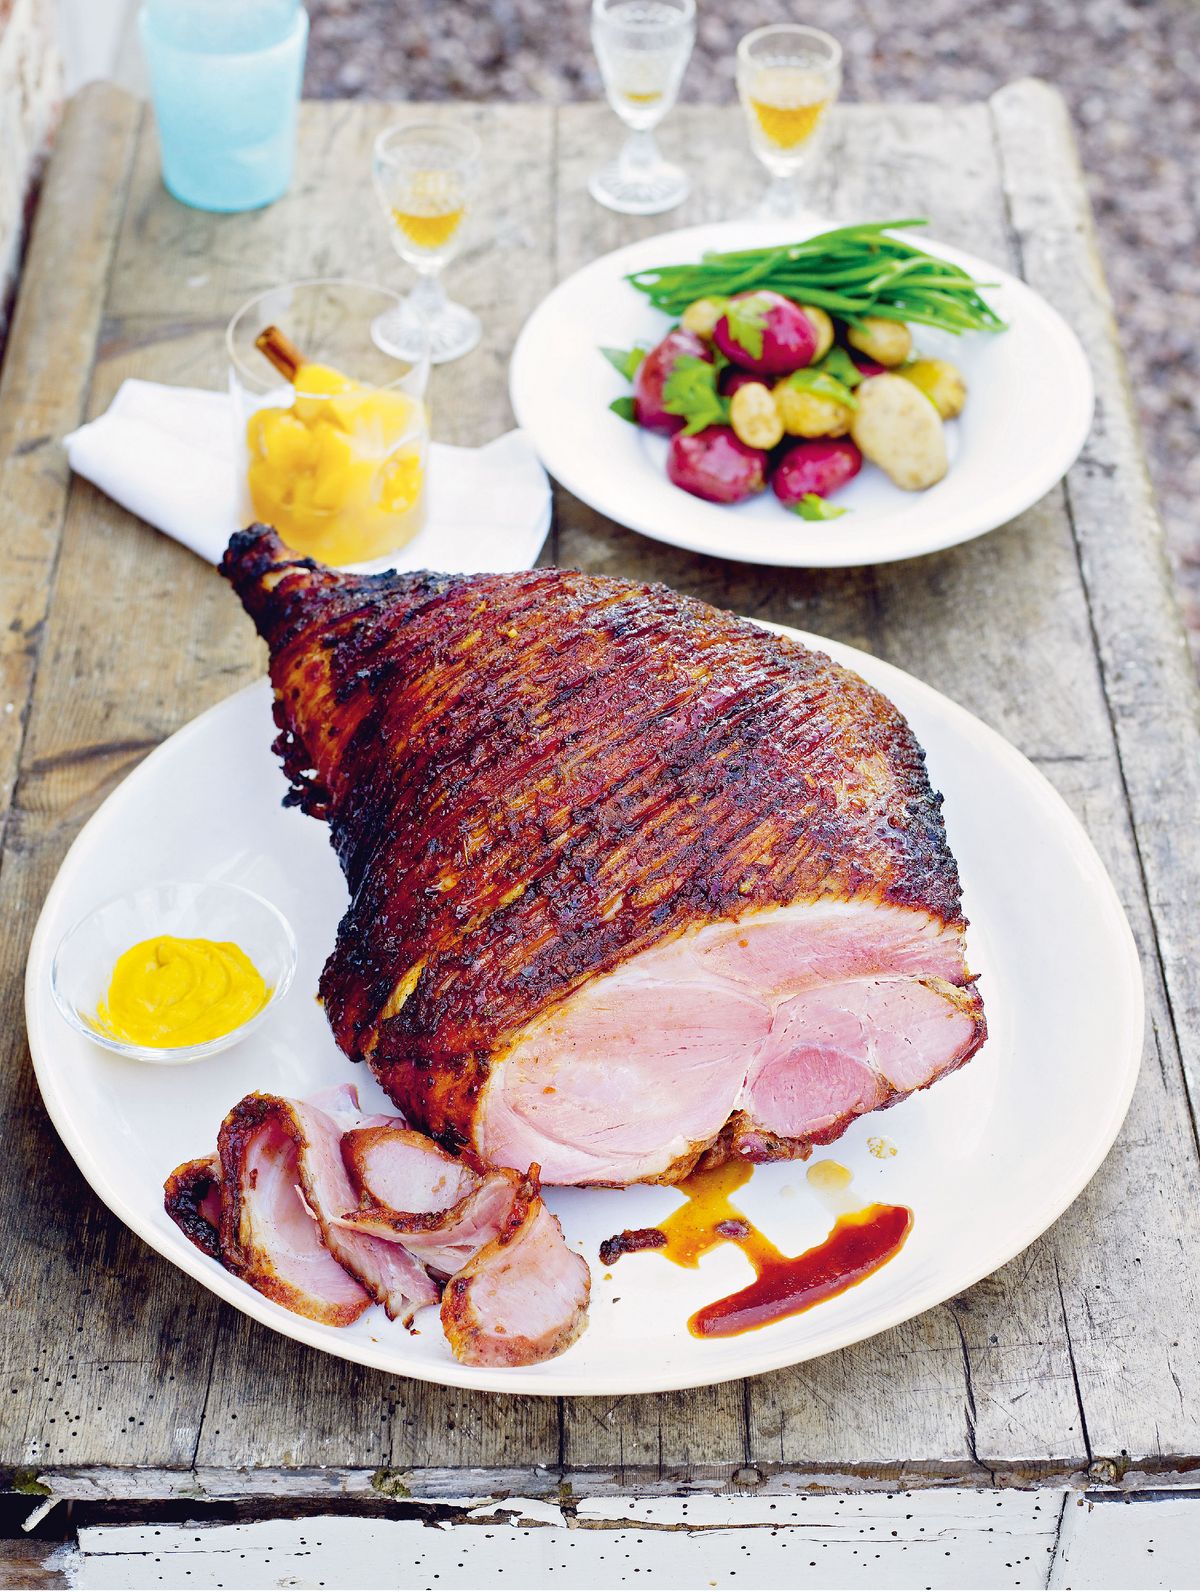 Jamie Oliver’s Jerk Ham, Rubbed with Spices and Glazed with Rum-Spiked Marmalade